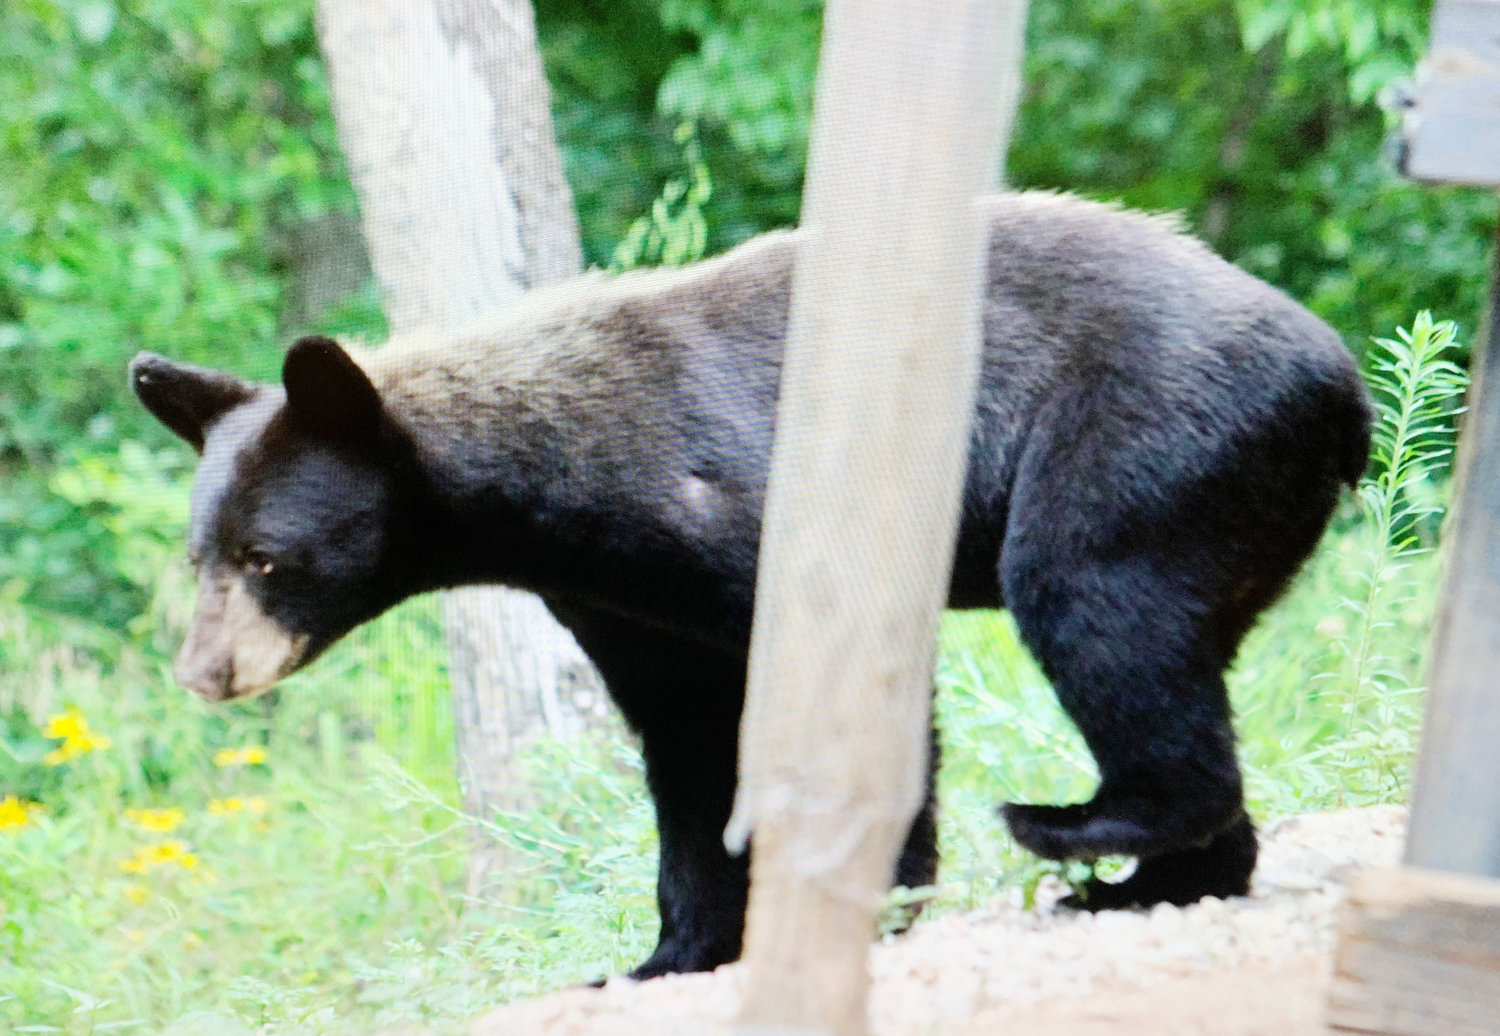 This young bear spent several days in the area on the west side of the Gasconade River. The Missouri Department of Conservation suggests not leaving food outside, which draws bears who have a very good sense of smell.